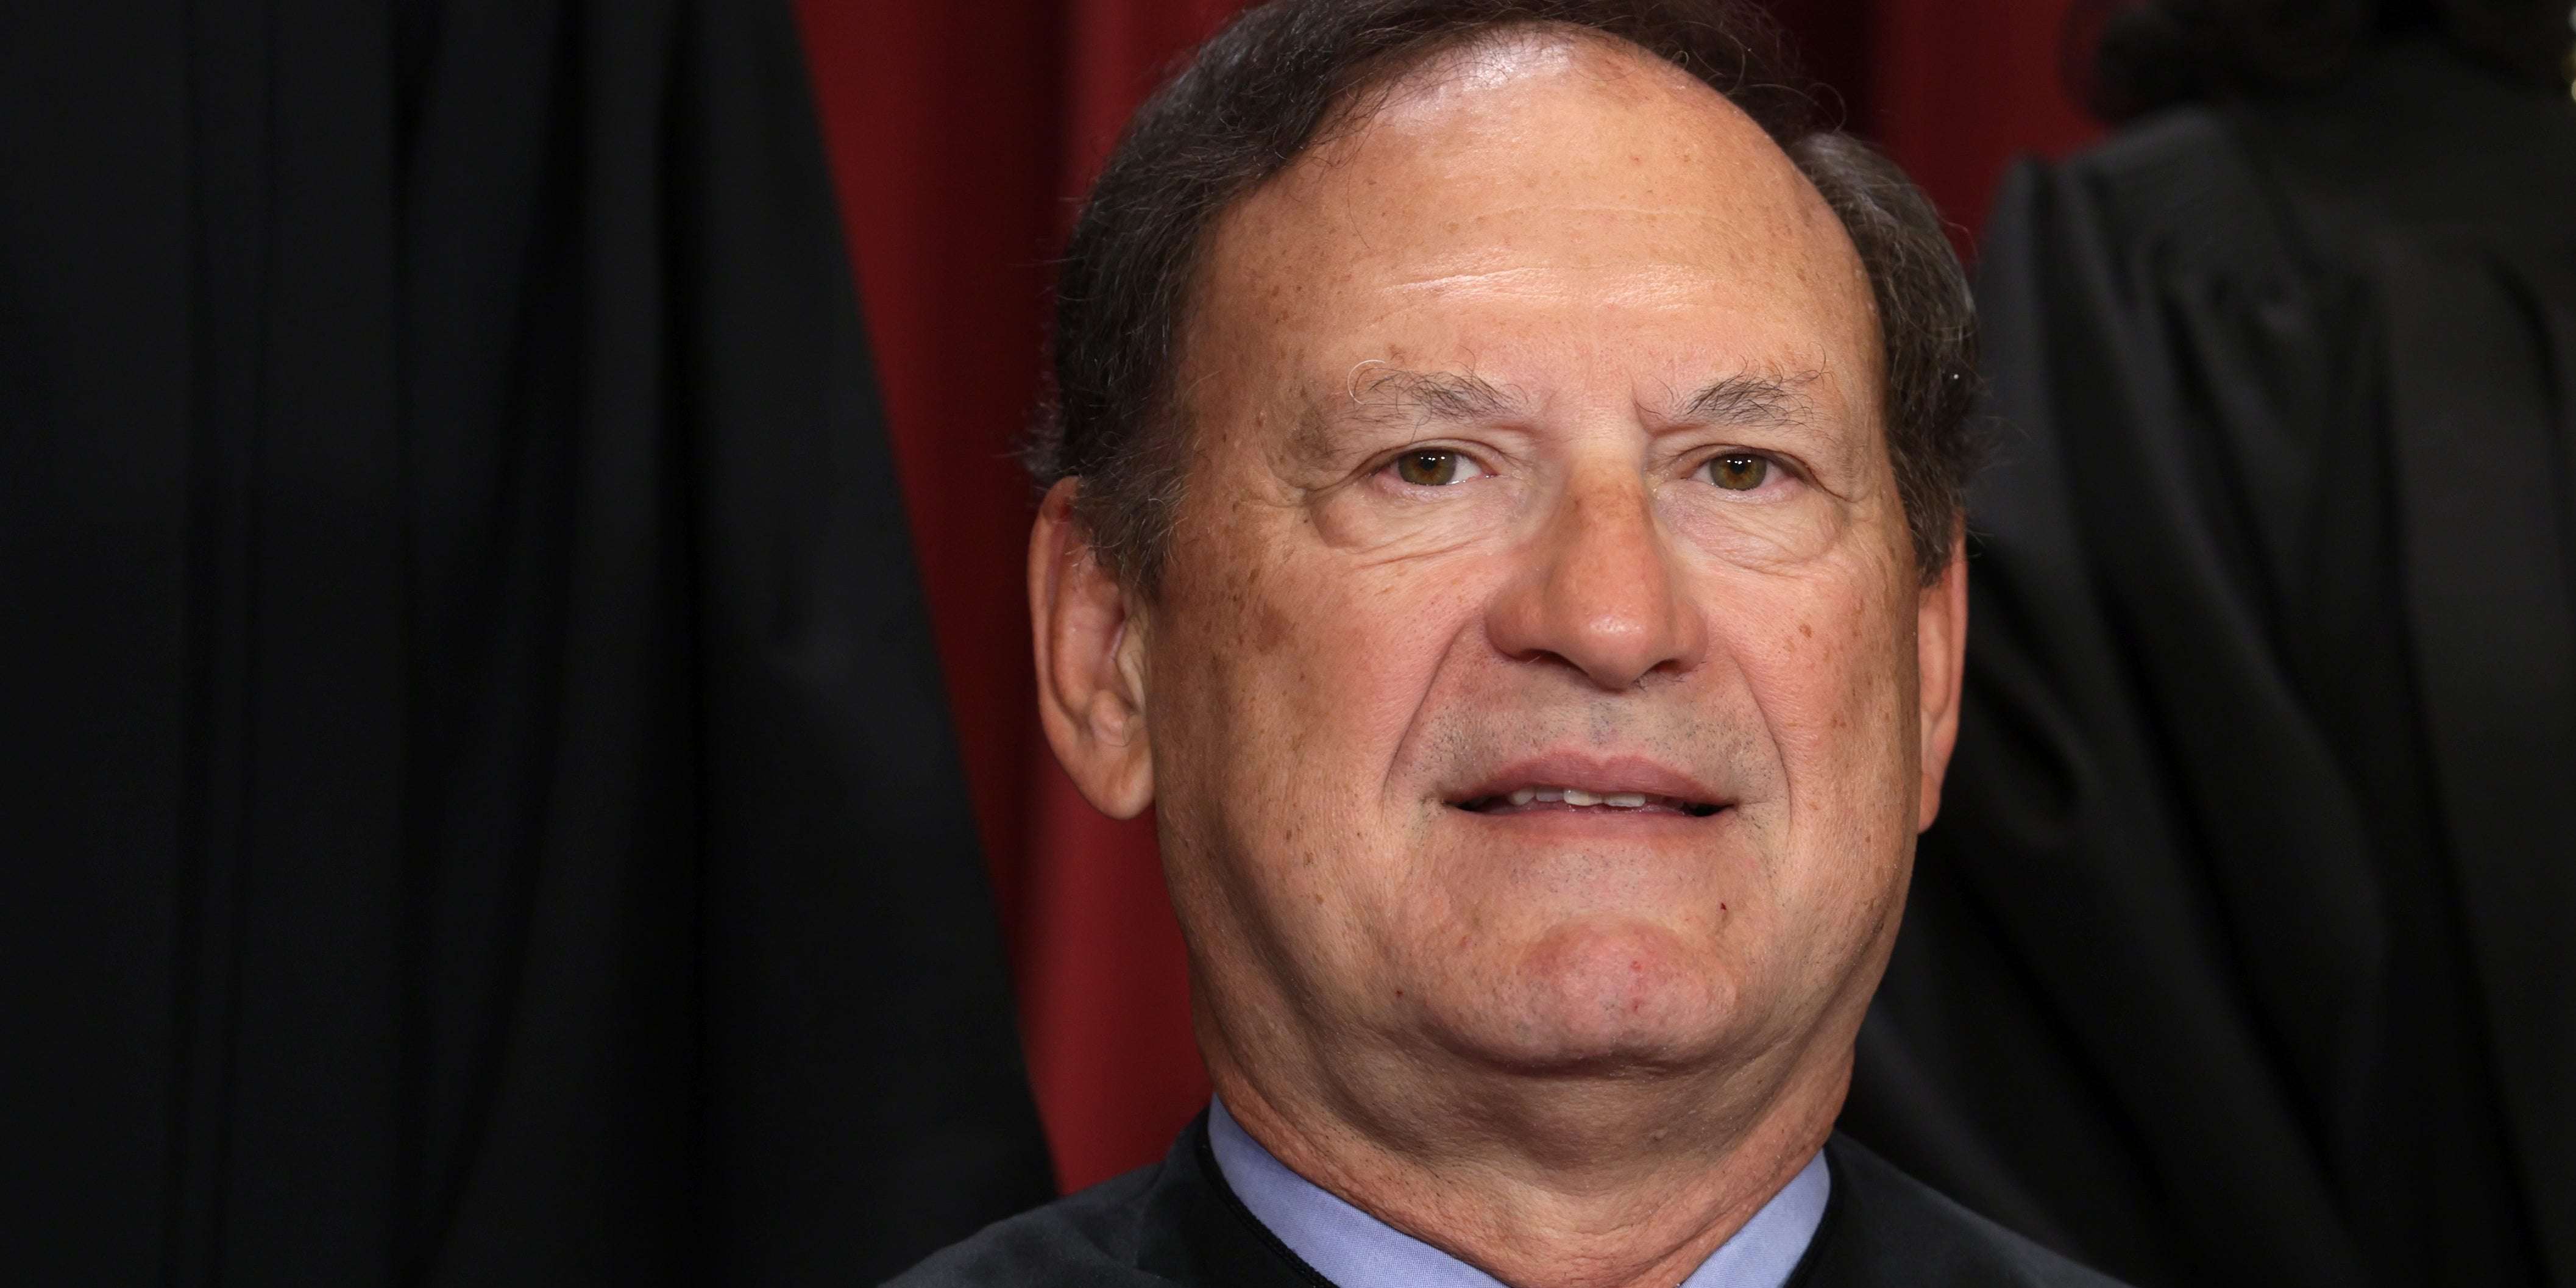 image for Alito’s Wife Leased Land to an Oil and Gas Firm While Justice Fought EPA